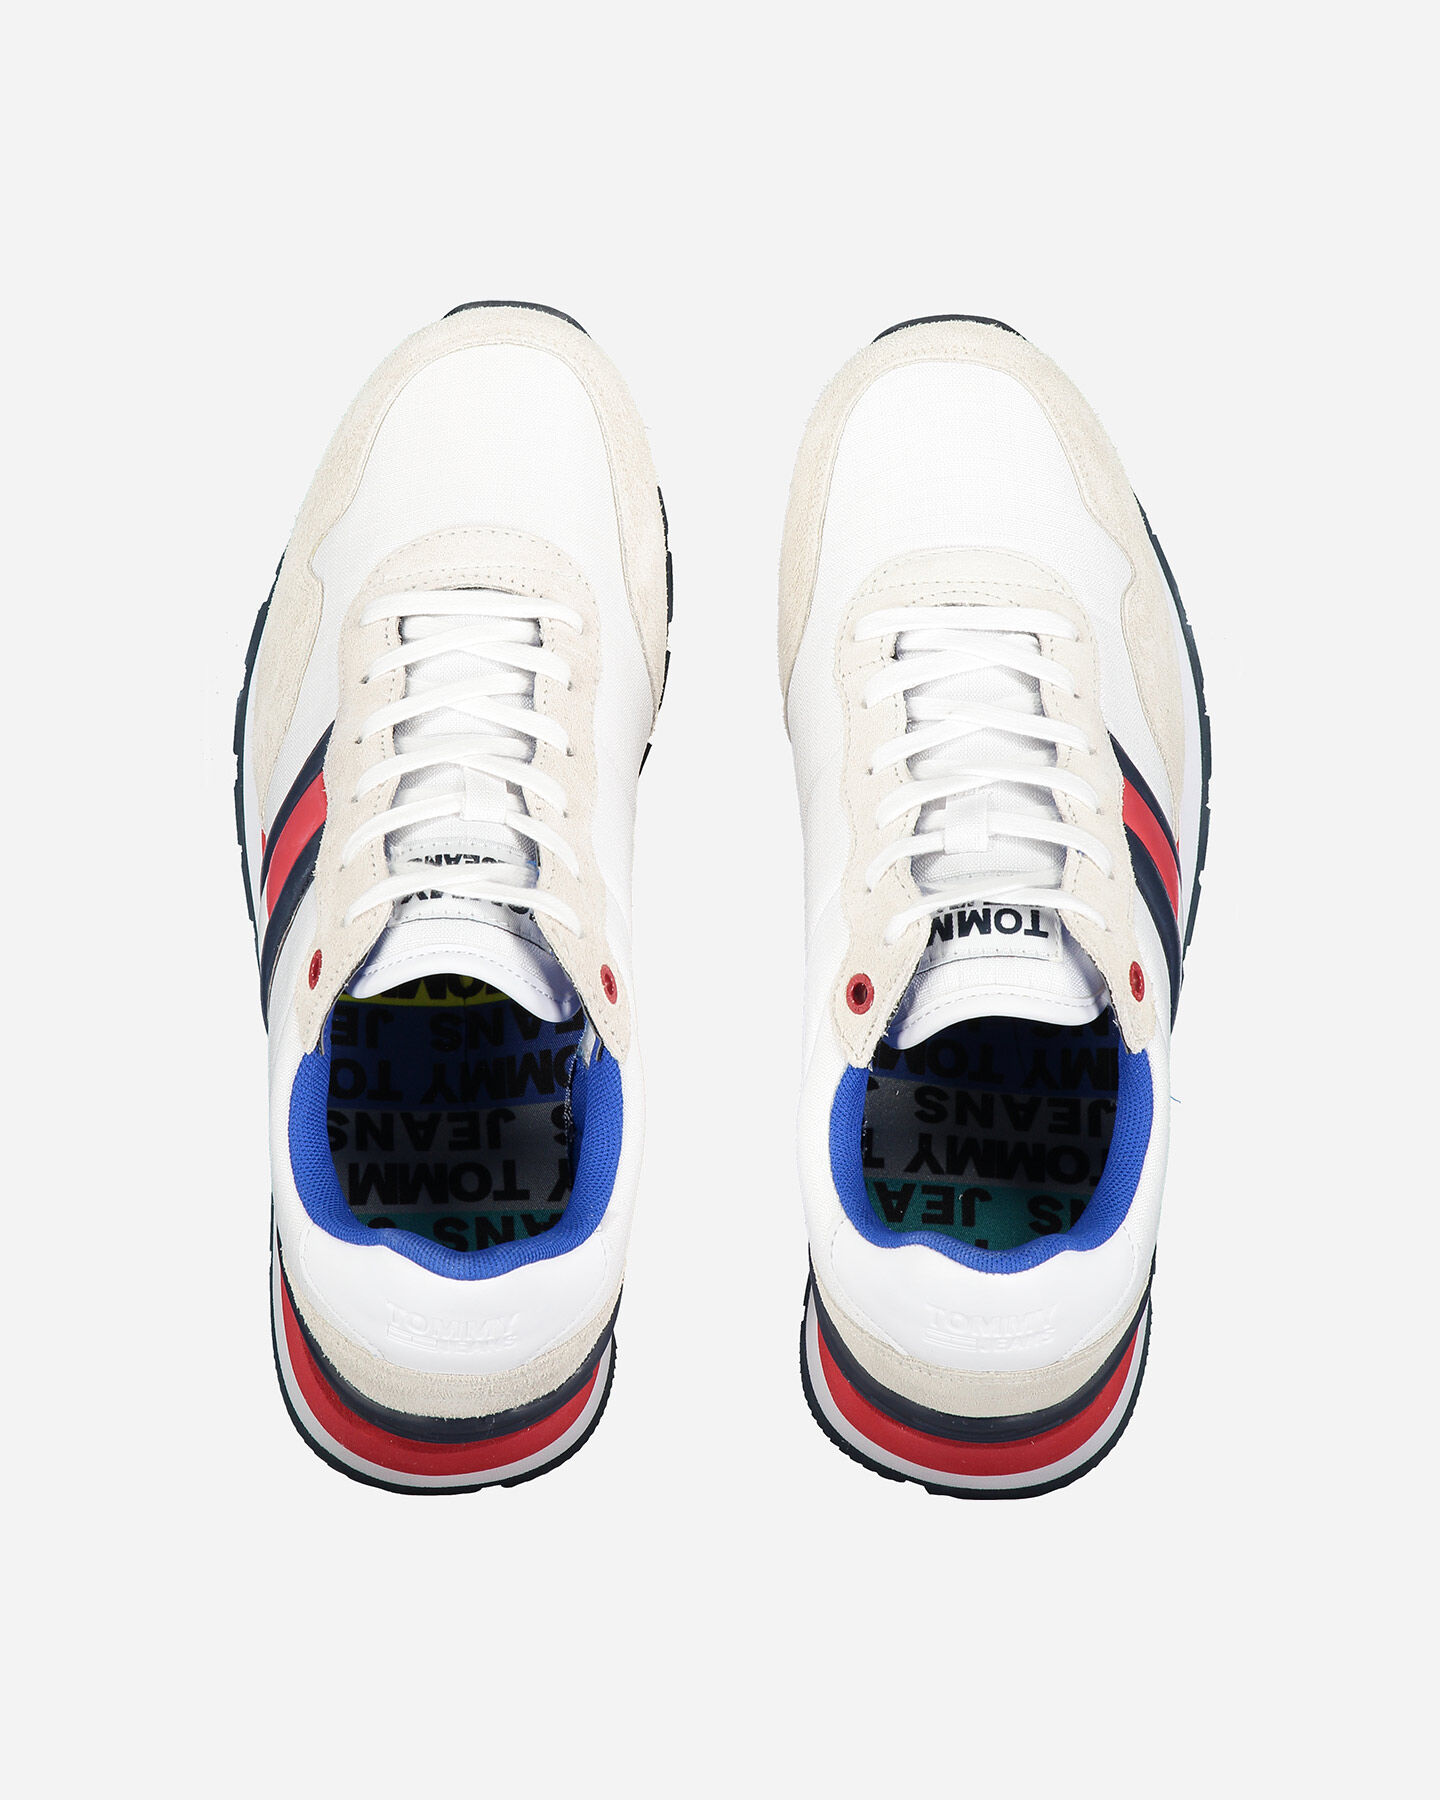  Scarpe sneakers TOMMY HILFIGER LIFESTYLE M S4080160|0K9|41 scatto 3